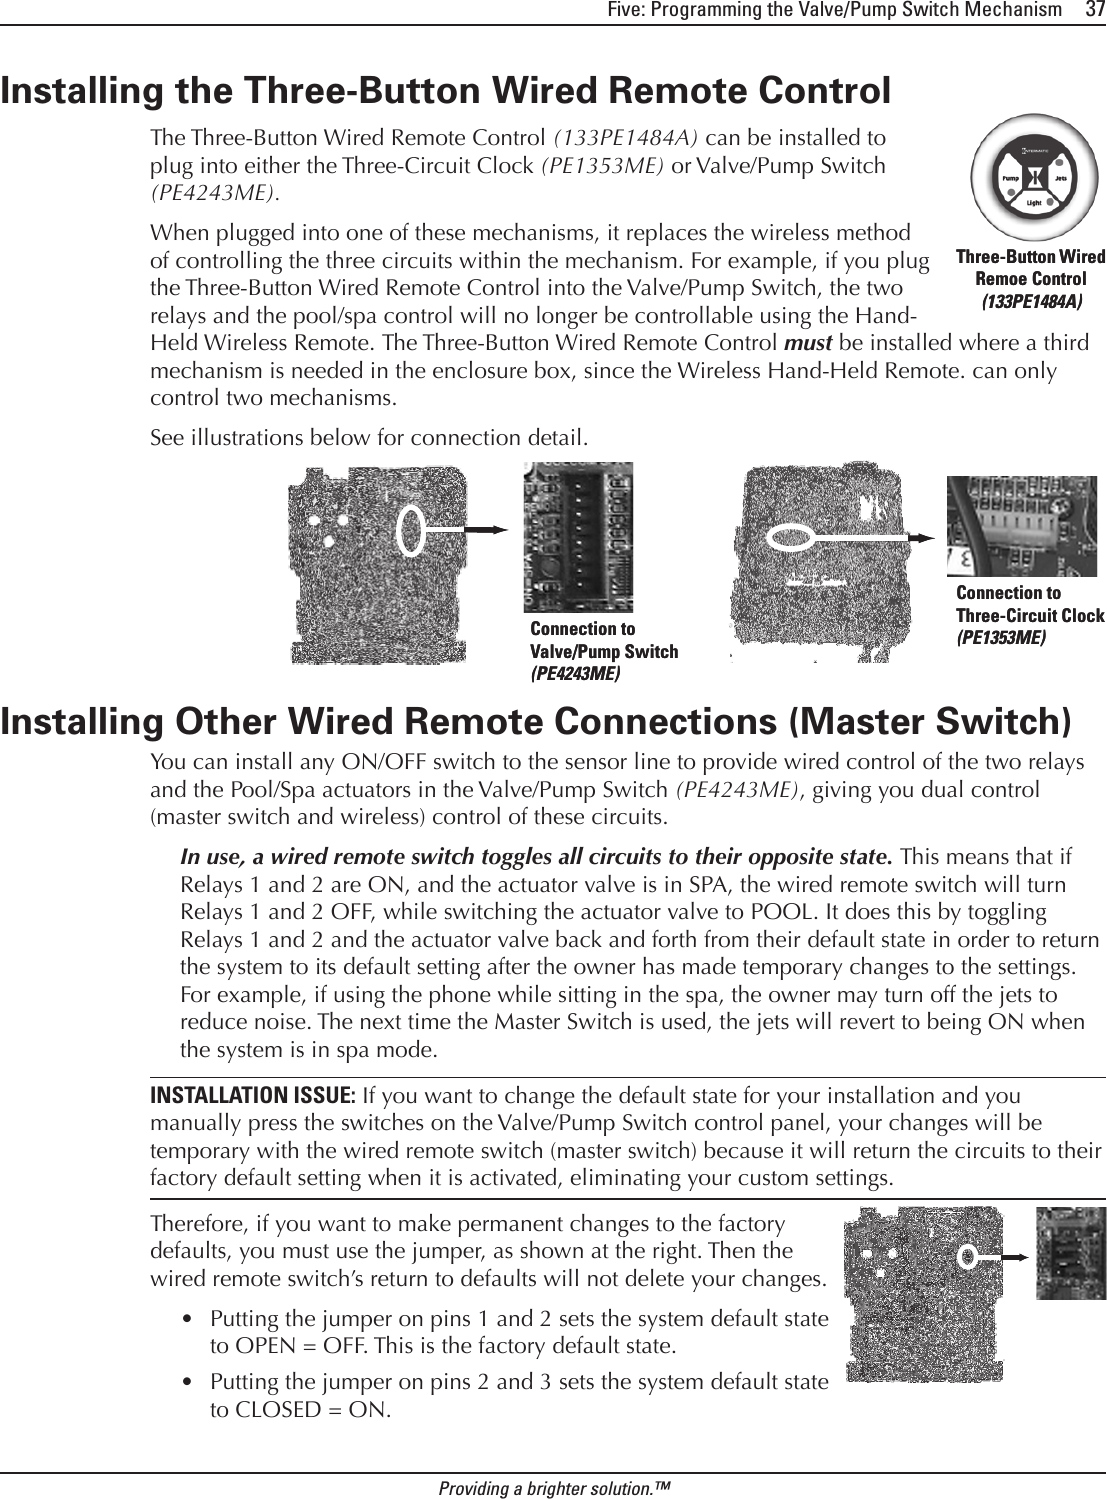 Five: Programming the Valve/Pump Switch Mechanism     37Providing a brighter solution.™Installing the Three-Button Wired Remote Control   The Three-Button Wired Remote Control (133PE1484A) can be installed to plug into either the Three-Circuit Clock (PE1353ME) or Valve/Pump Switch (PE4243ME). When plugged into one of these mechanisms, it replaces the wireless method of controlling the three circuits within the mechanism. For example, if you plug the Three-Button Wired Remote Control into the Valve/Pump Switch, the two relays and the pool/spa control will no longer be controllable using the Hand-Held Wireless Remote. The Three-Button Wired Remote Control must be installed where a third mechanism is needed in the enclosure box, since the Wireless Hand-Held Remote. can only control two mechanisms.See illustrations below for connection detail.Installing Other Wired Remote Connections (Master Switch)You can install any ON/OFF switch to the sensor line to provide wired control of the two relays and the Pool/Spa actuators in the Valve/Pump Switch (PE4243ME), giving you dual control (master switch and wireless) control of these circuits.In use, a wired remote switch toggles all circuits to their opposite state. This means that if Relays 1 and 2 are ON, and the actuator valve is in SPA, the wired remote switch will turn Relays 1 and 2 OFF, while switching the actuator valve to POOL. It does this by toggling Relays 1 and 2 and the actuator valve back and forth from their default state in order to return the system to its default setting after the owner has made temporary changes to the settings. For example, if using the phone while sitting in the spa, the owner may turn off the jets to reduce noise. The next time the Master Switch is used, the jets will revert to being ON when the system is in spa mode.INSTALLATION ISSUE: If you want to change the default state for your installation and you manually press the switches on the Valve/Pump Switch control panel, your changes will be temporary with the wired remote switch (master switch) because it will return the circuits to their factory default setting when it is activated, eliminating your custom settings.Therefore, if you want to make permanent changes to the factory defaults, you must use the jumper, as shown at the right. Then the wired remote switch’s return to defaults will not delete your changes. Putting the jumper on pins 1 and 2 sets the system default state to OPEN = OFF. This is the factory default state.Putting the jumper on pins 2 and 3 sets the system default state to CLOSED = ON.••Three-Button Wired Remoe Control (133PE1484A)Three-Button Wired Remoe Control (133PE1484A)Connection to Valve/Pump Switch (PE4243ME)Connection to Valve/Pump Switch (PE4243ME)Connection to Three-Circuit Clock (PE1353ME)Connection to Three-Circuit Clock (PE1353ME)